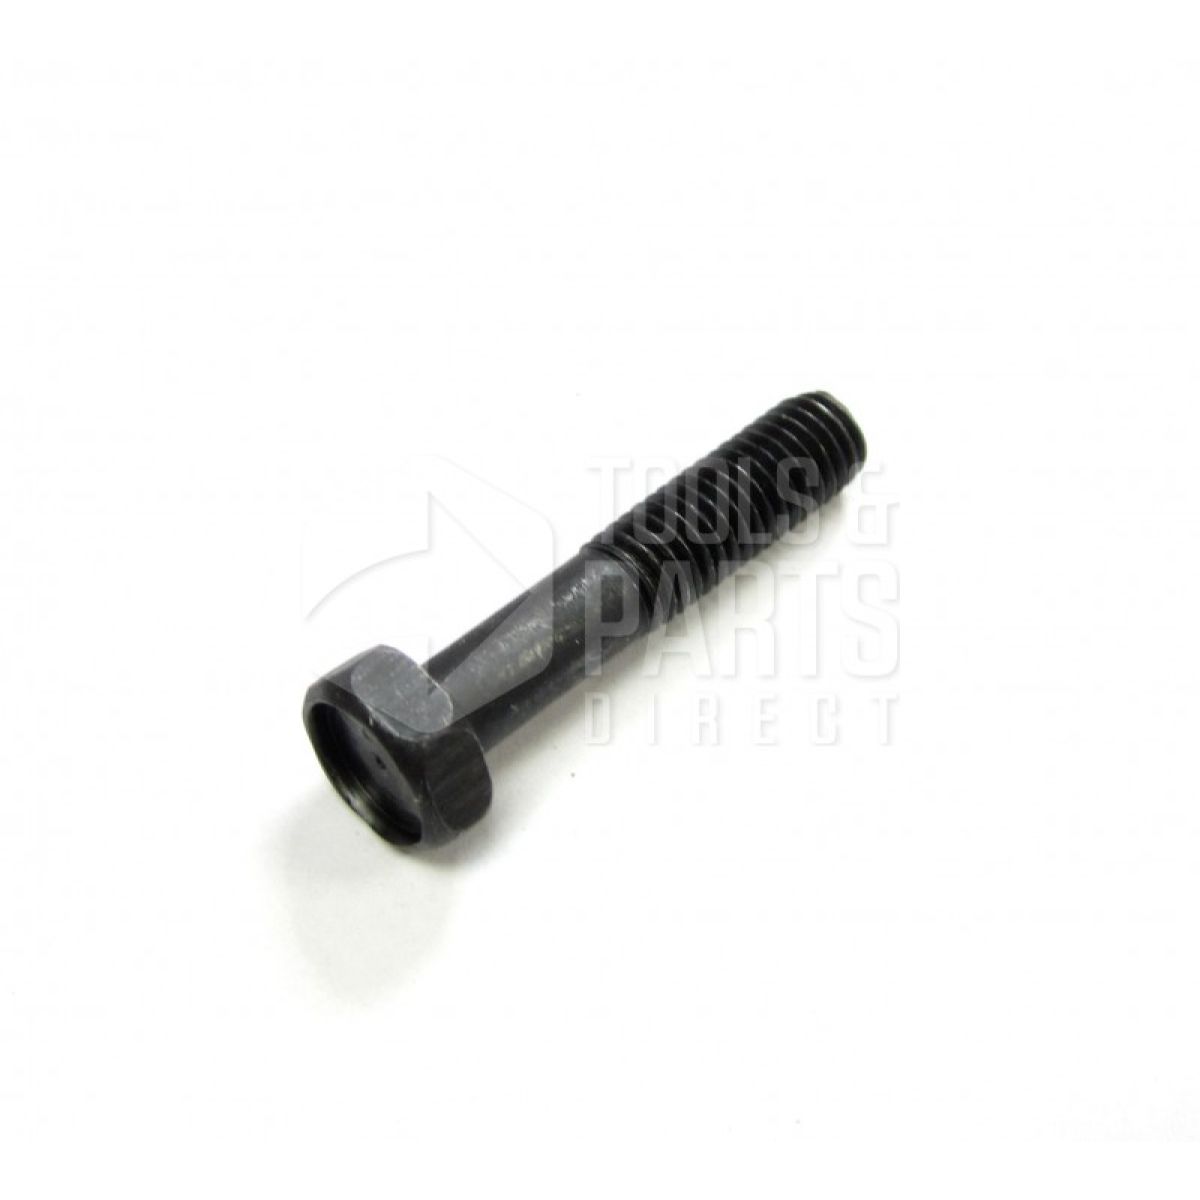 WM835 Type 2 Spares and Parts for Black & Decker WM835 WORKMATE (Workmates)  - Power Tool Spares